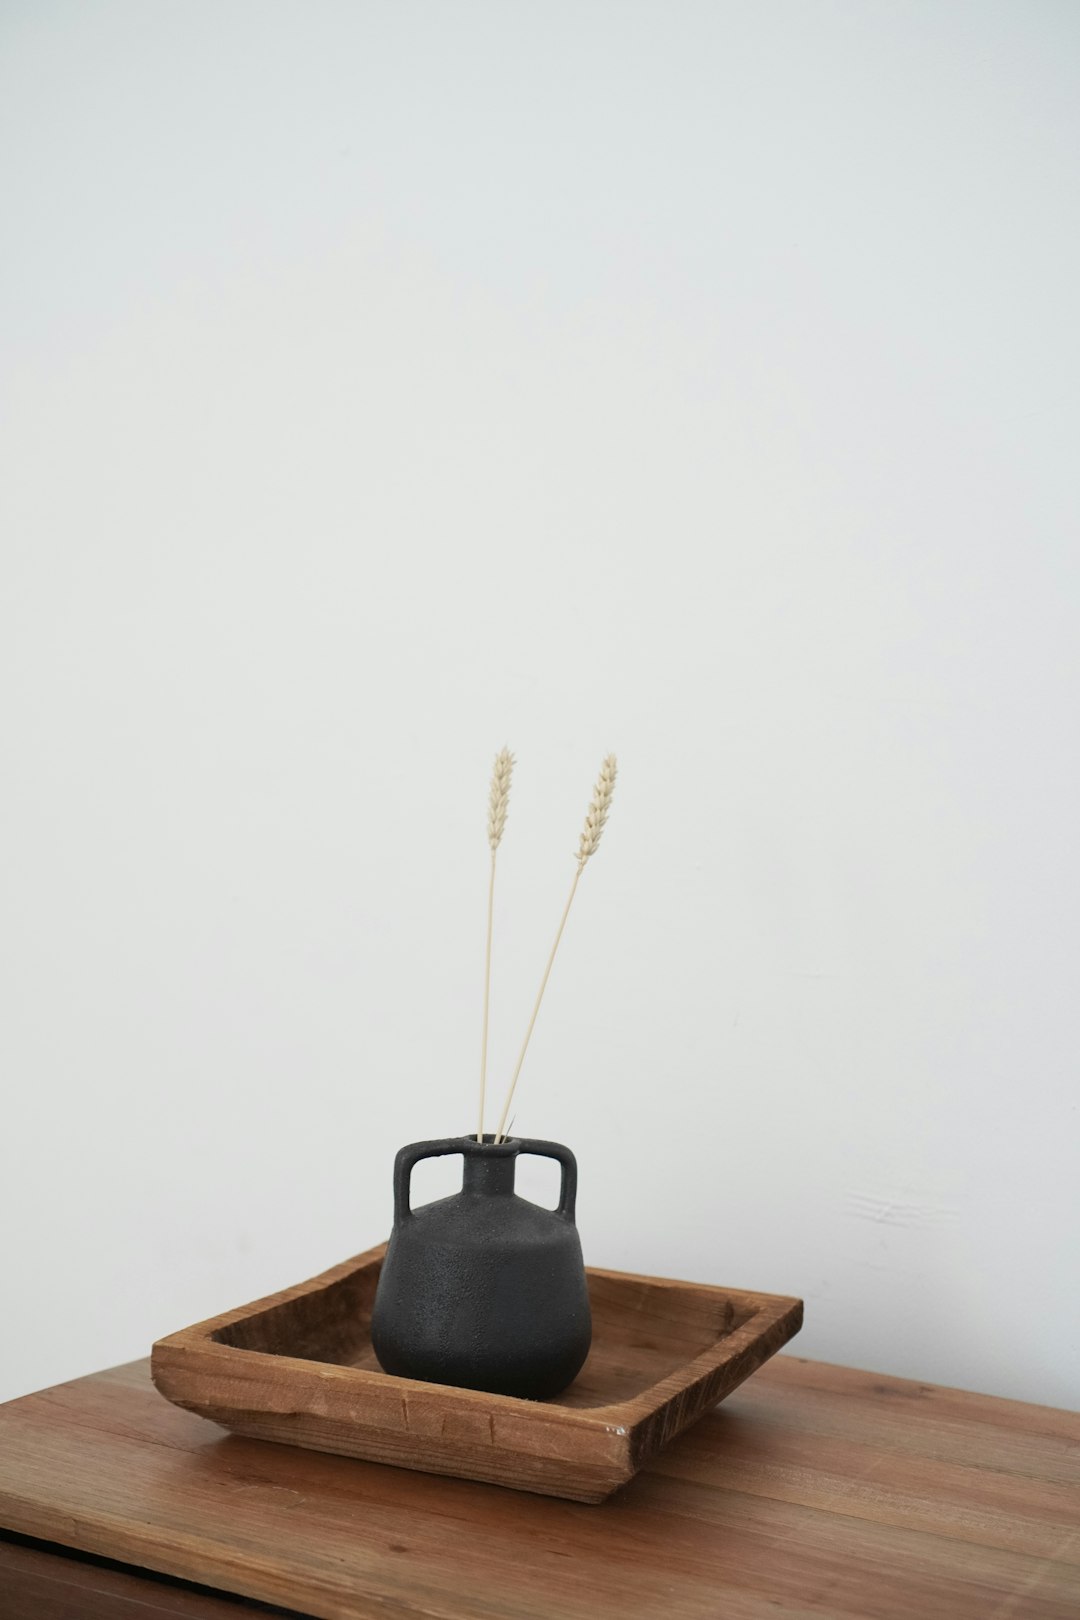 black leather bag on brown wooden table